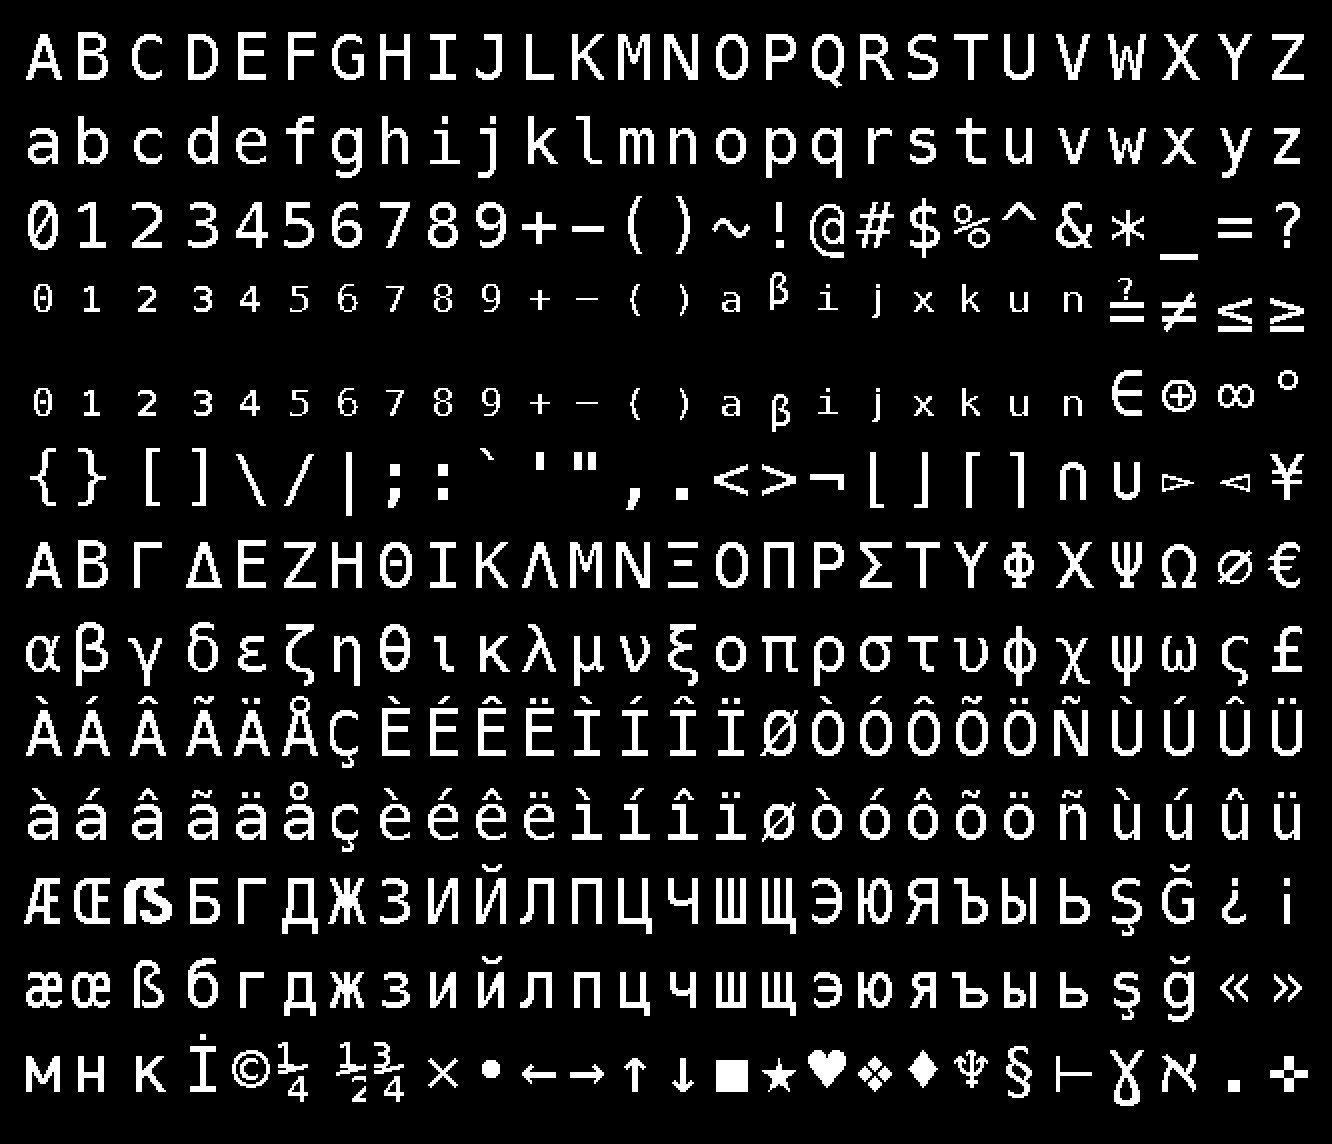 O Xrhsths Morgan Mcguire Sto Twitter Updated Nano Quadplay Font Sheet To Support More Languages Some Are Aliased And Map The Same Unicode Character To The Same Glyph Now I Have A Lot